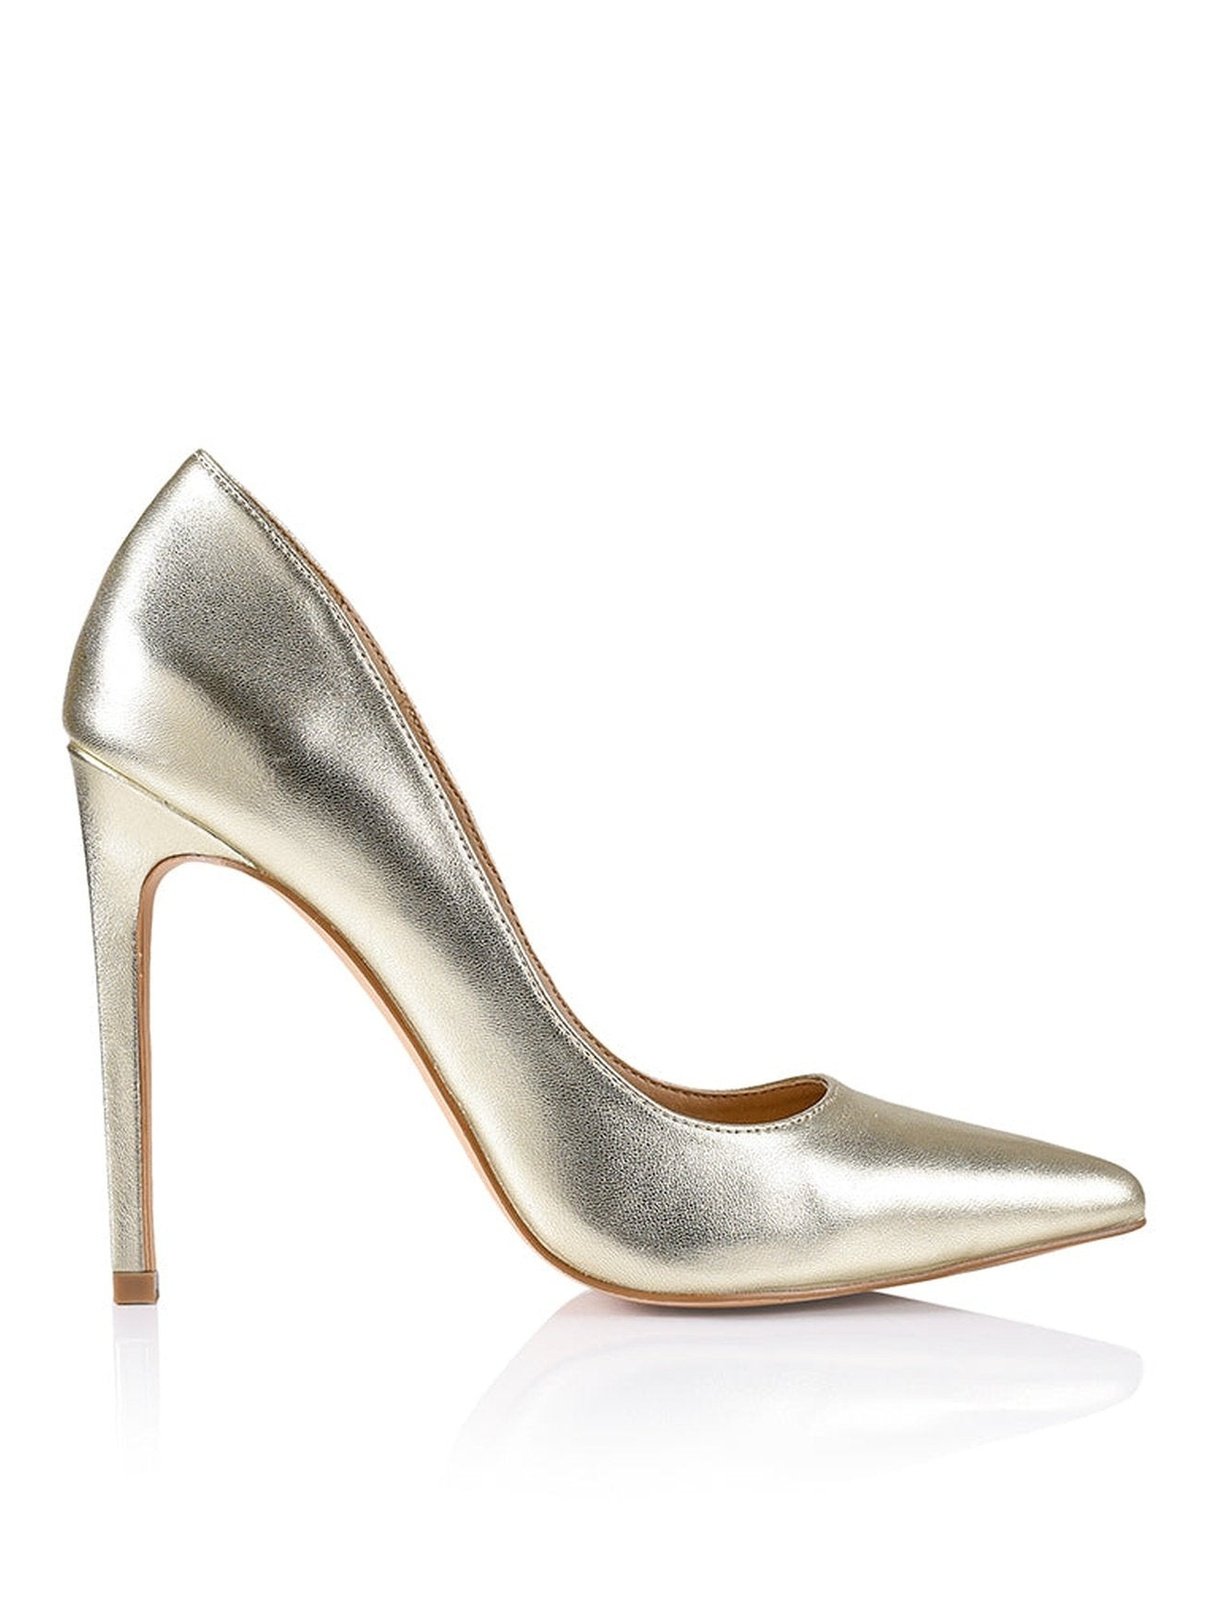 Anabelle Stiletto Pumps - Soft Gold Leather